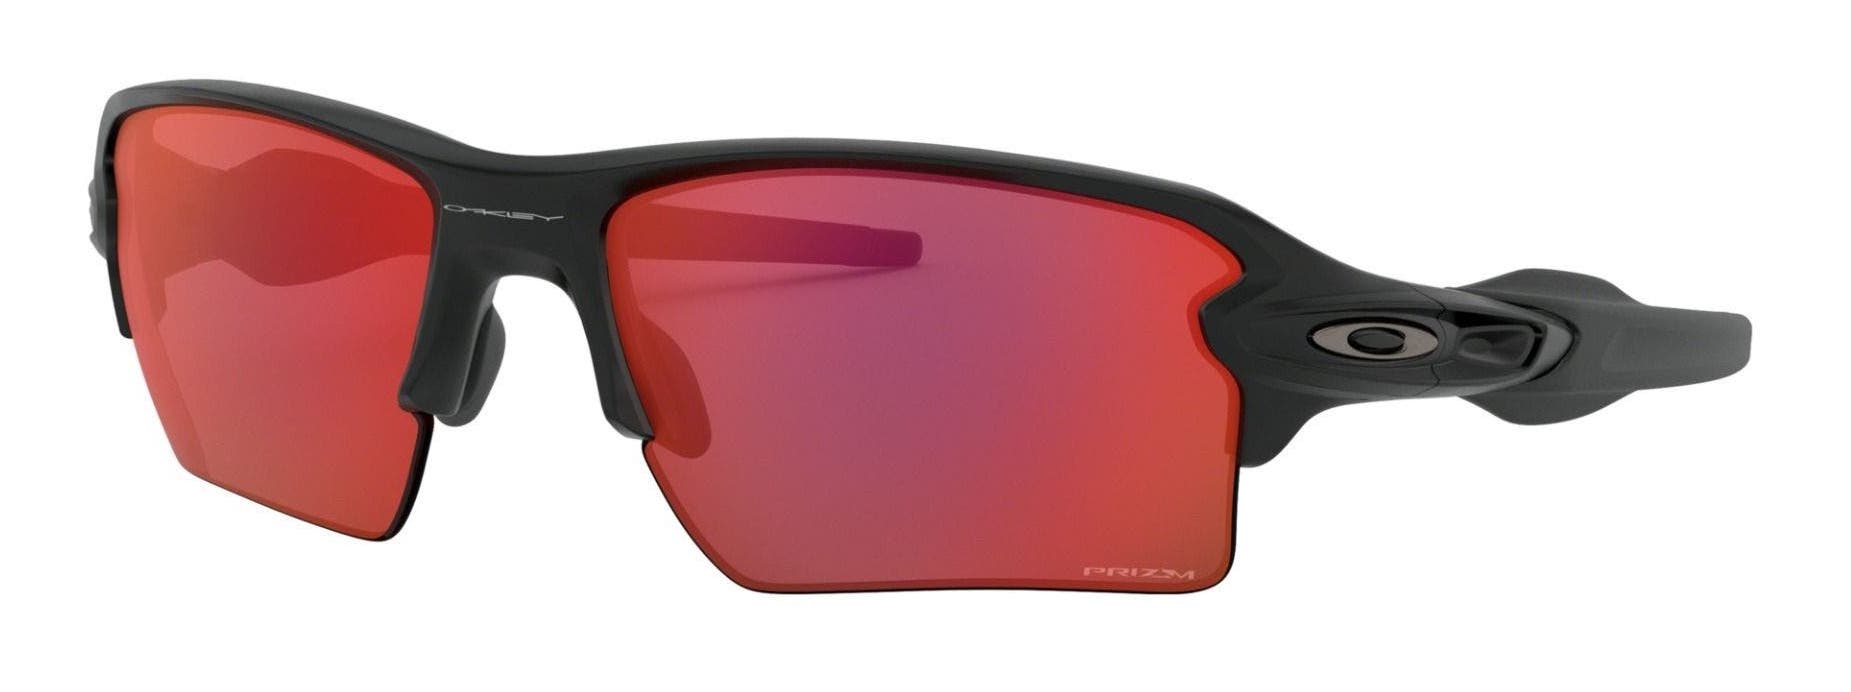 oakley flak 2.0 x sunglasses in matte black with prizm trail torch red lenses